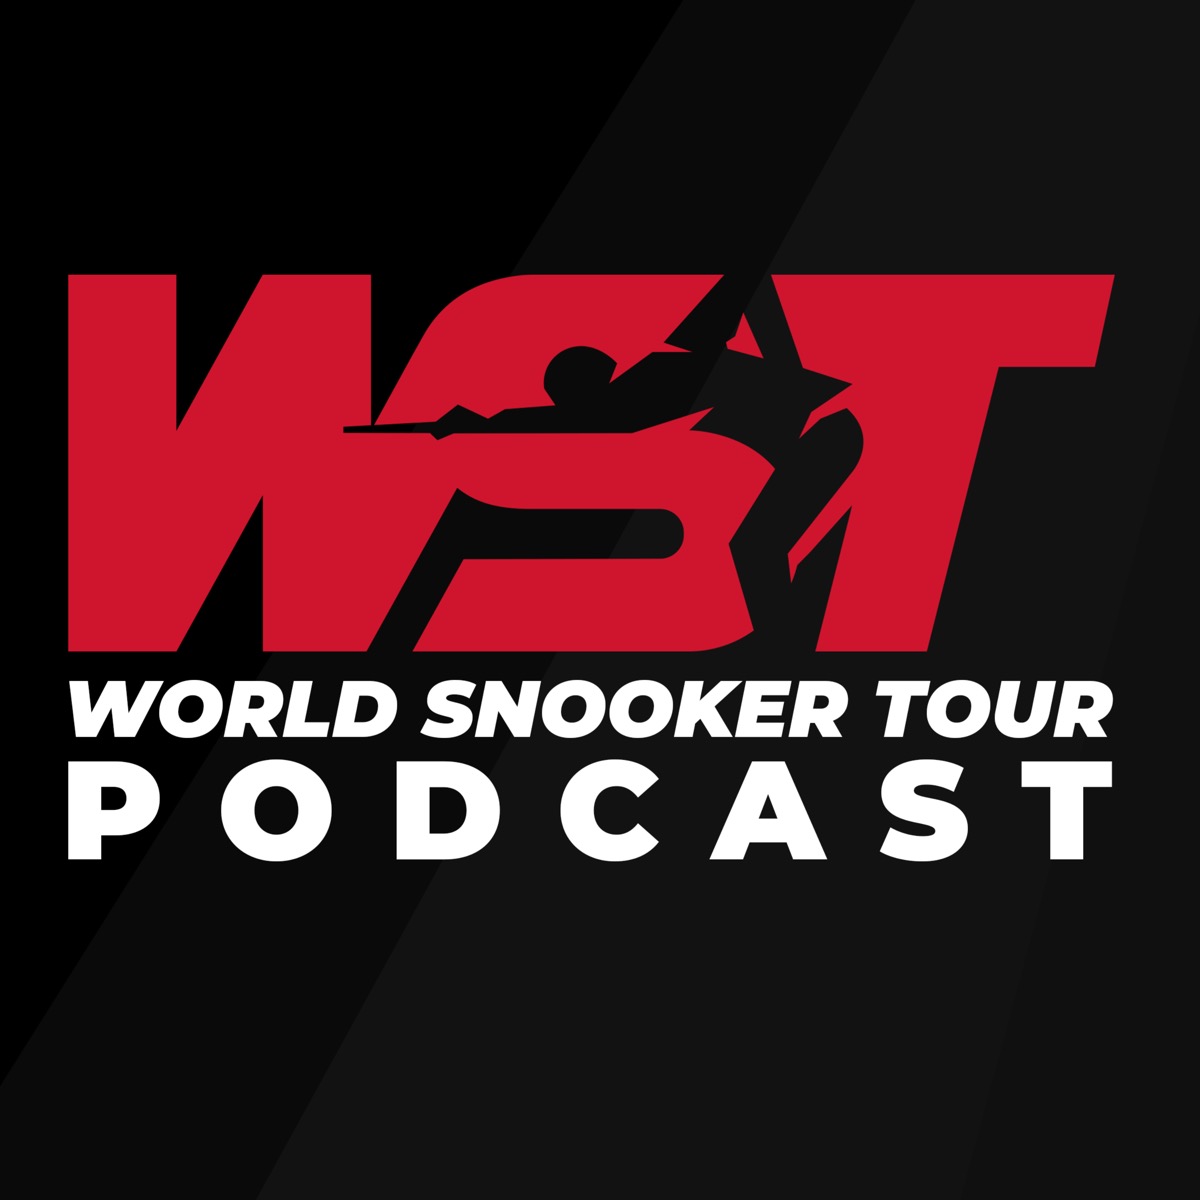 New WST Podcast Episode With Joe Johnson